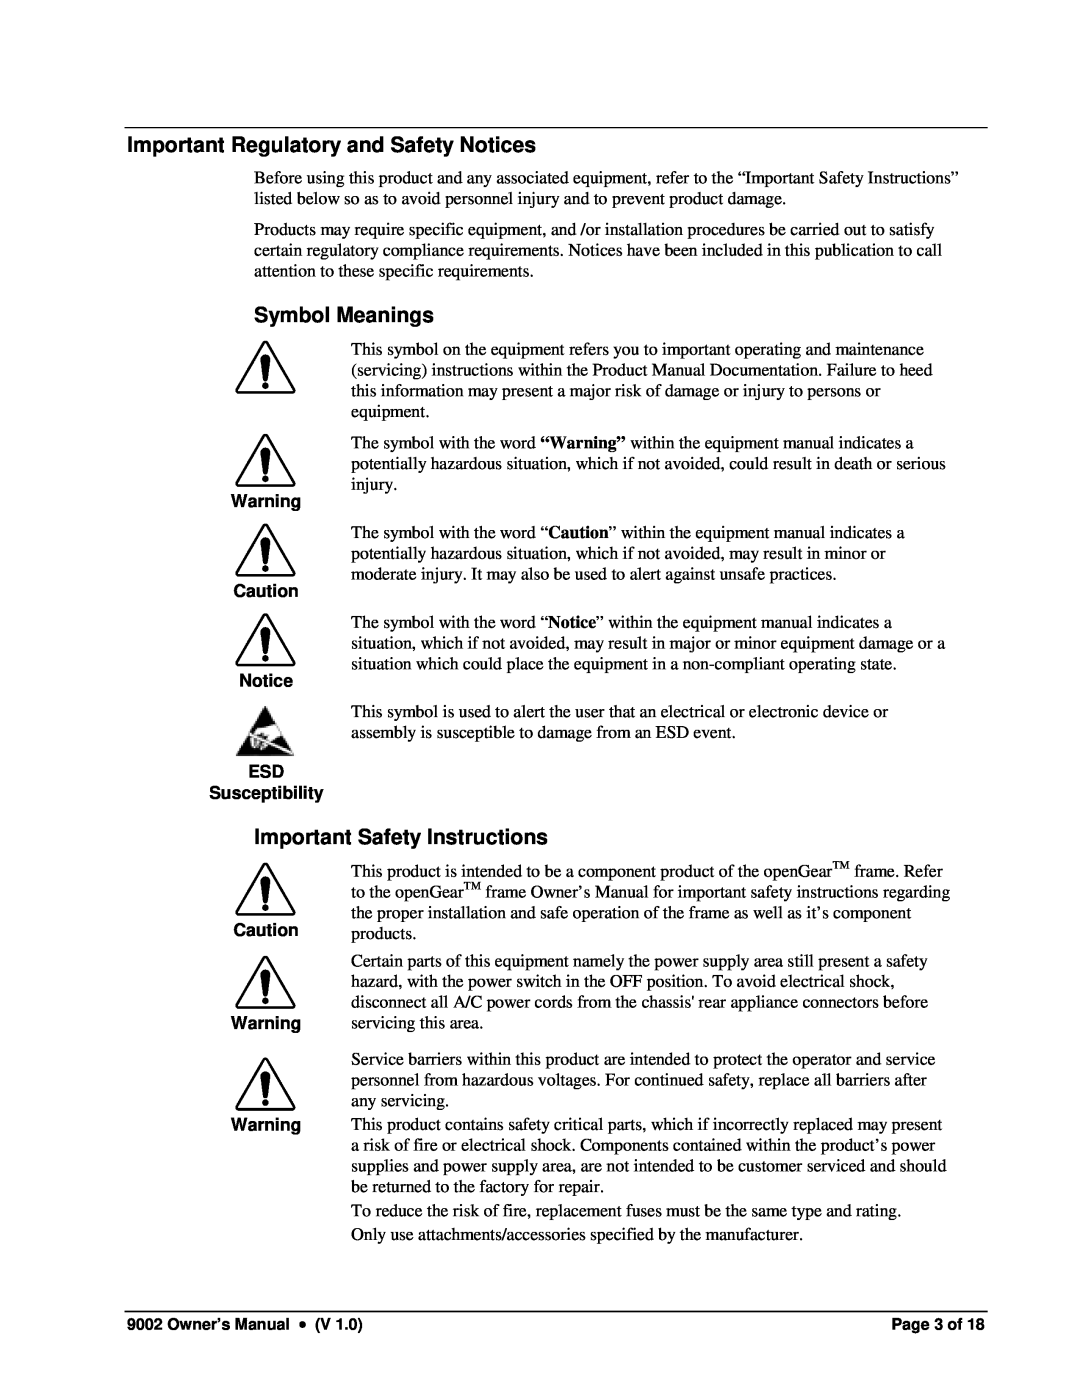 Cobalt Networks 9002 owner manual Important Regulatory and Safety Notices, Symbol Meanings, Important Safety Instructions 